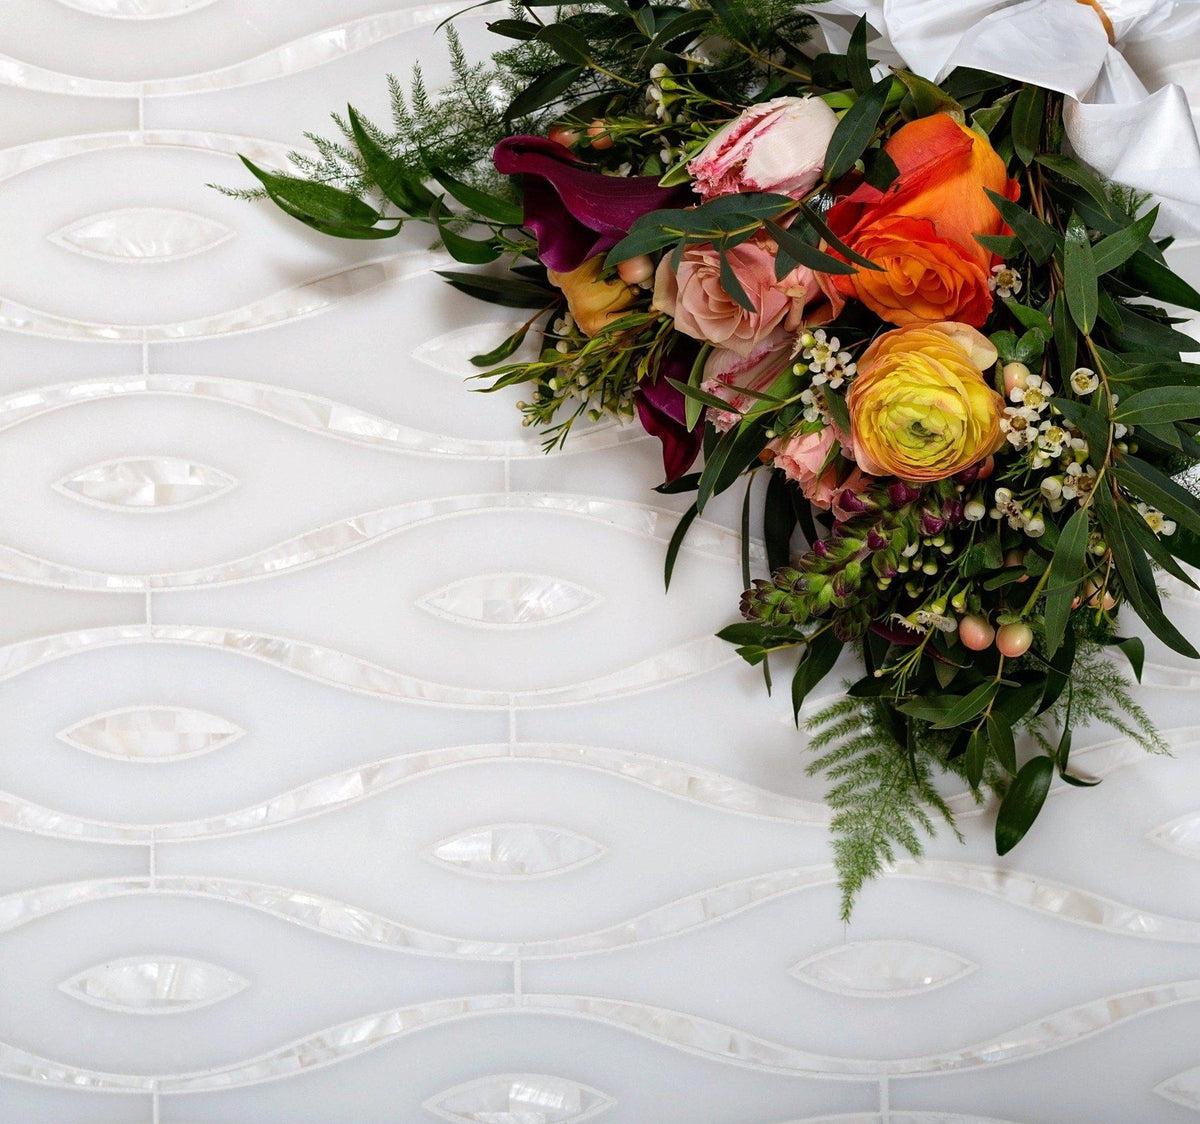 Pearl Wave White Marble & Mother Of Pearl Waterjet Mosaic Tile